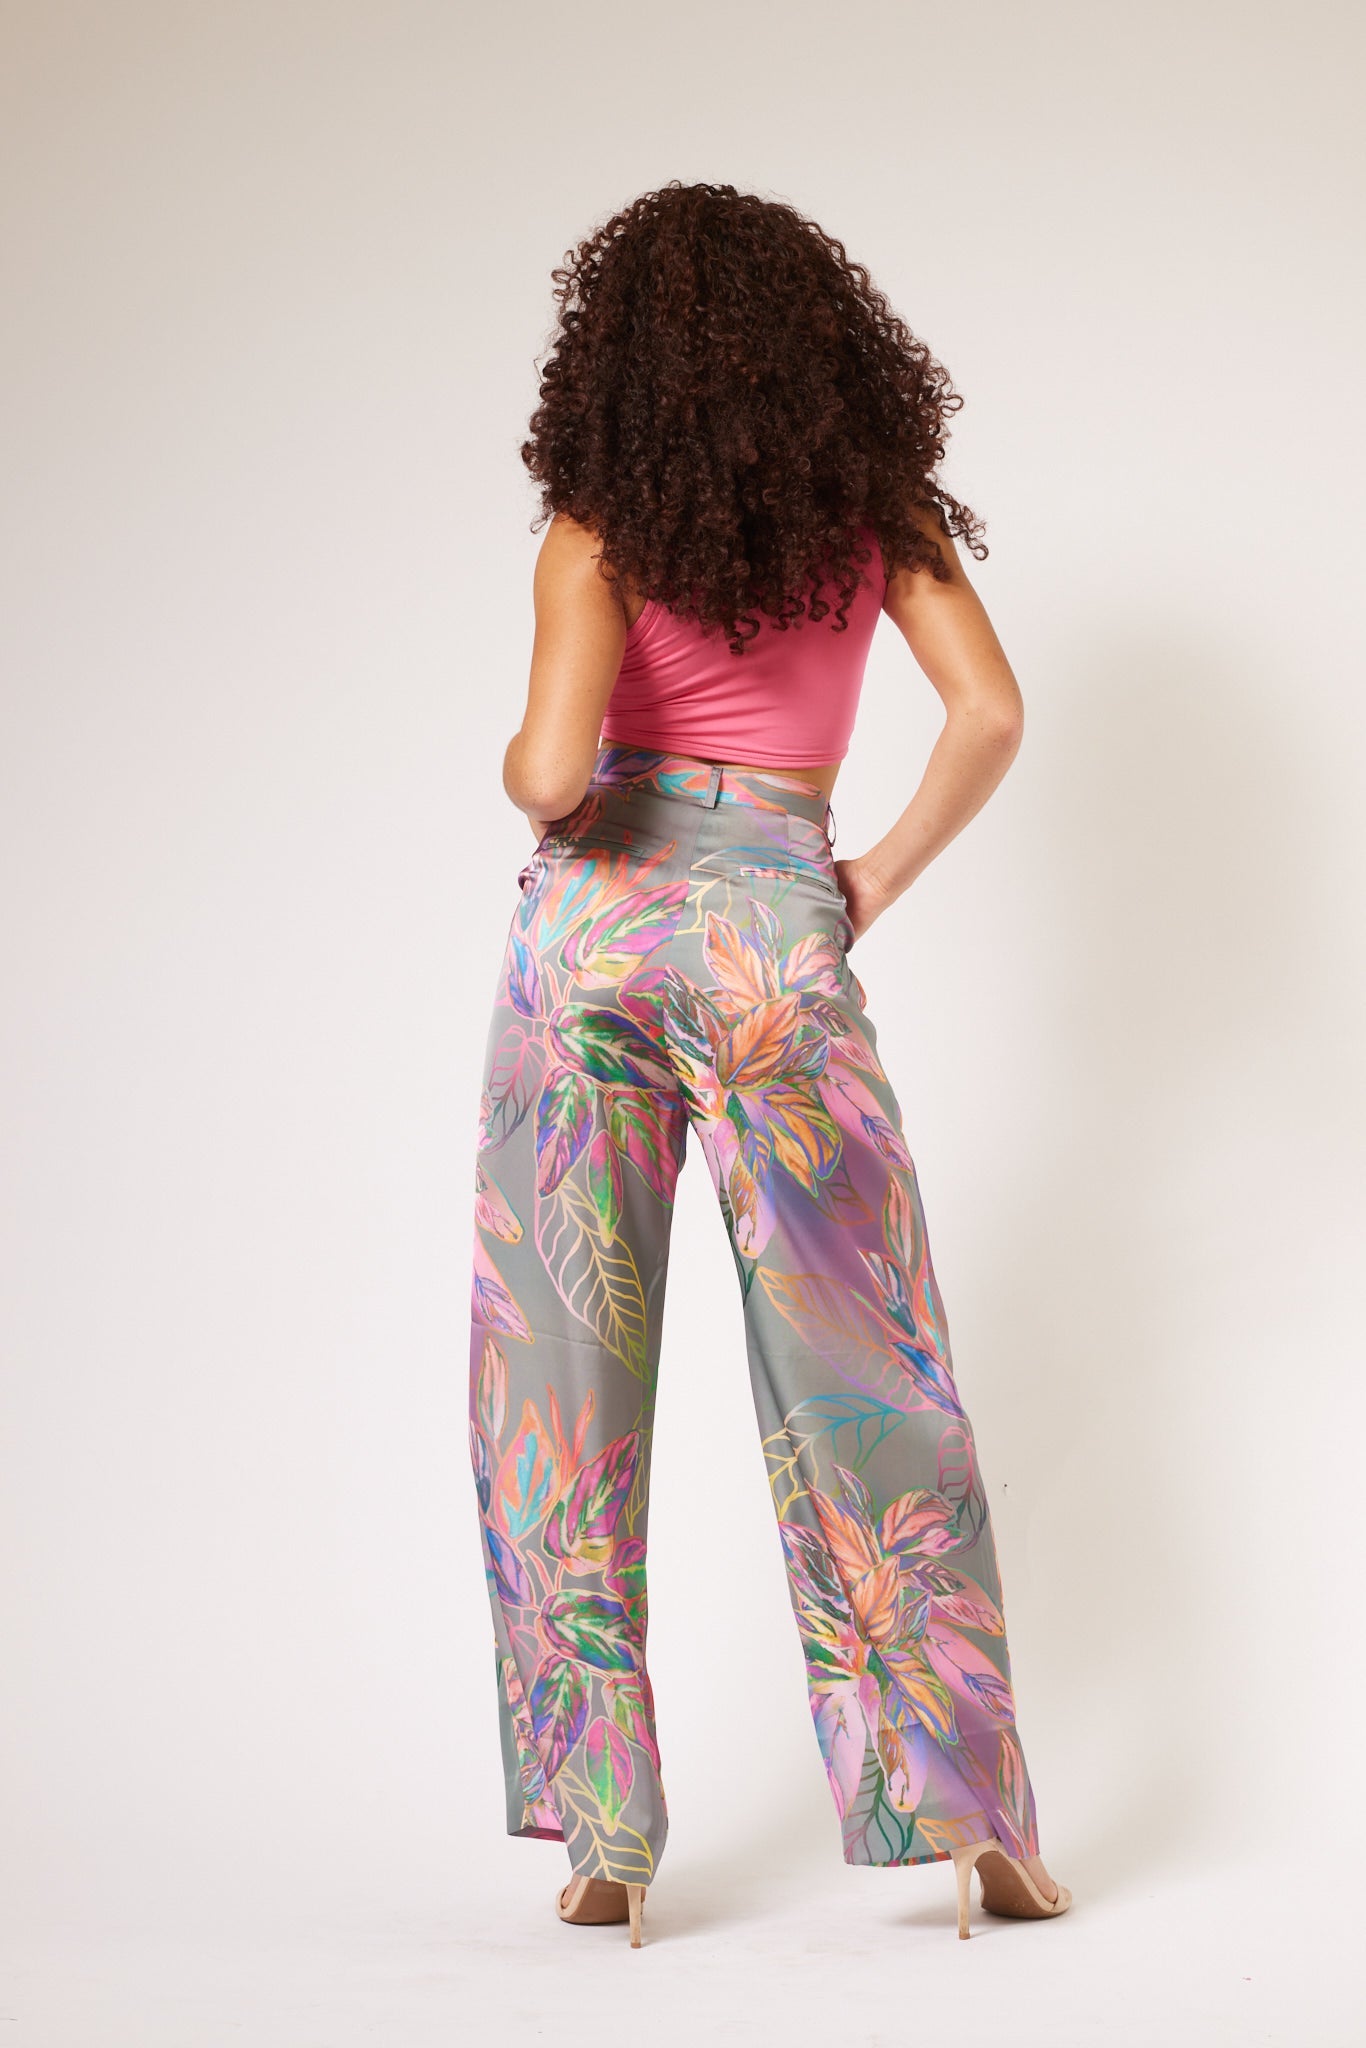 back view of woman modelling all over multicolored tropical yacht pants made from recycled materials